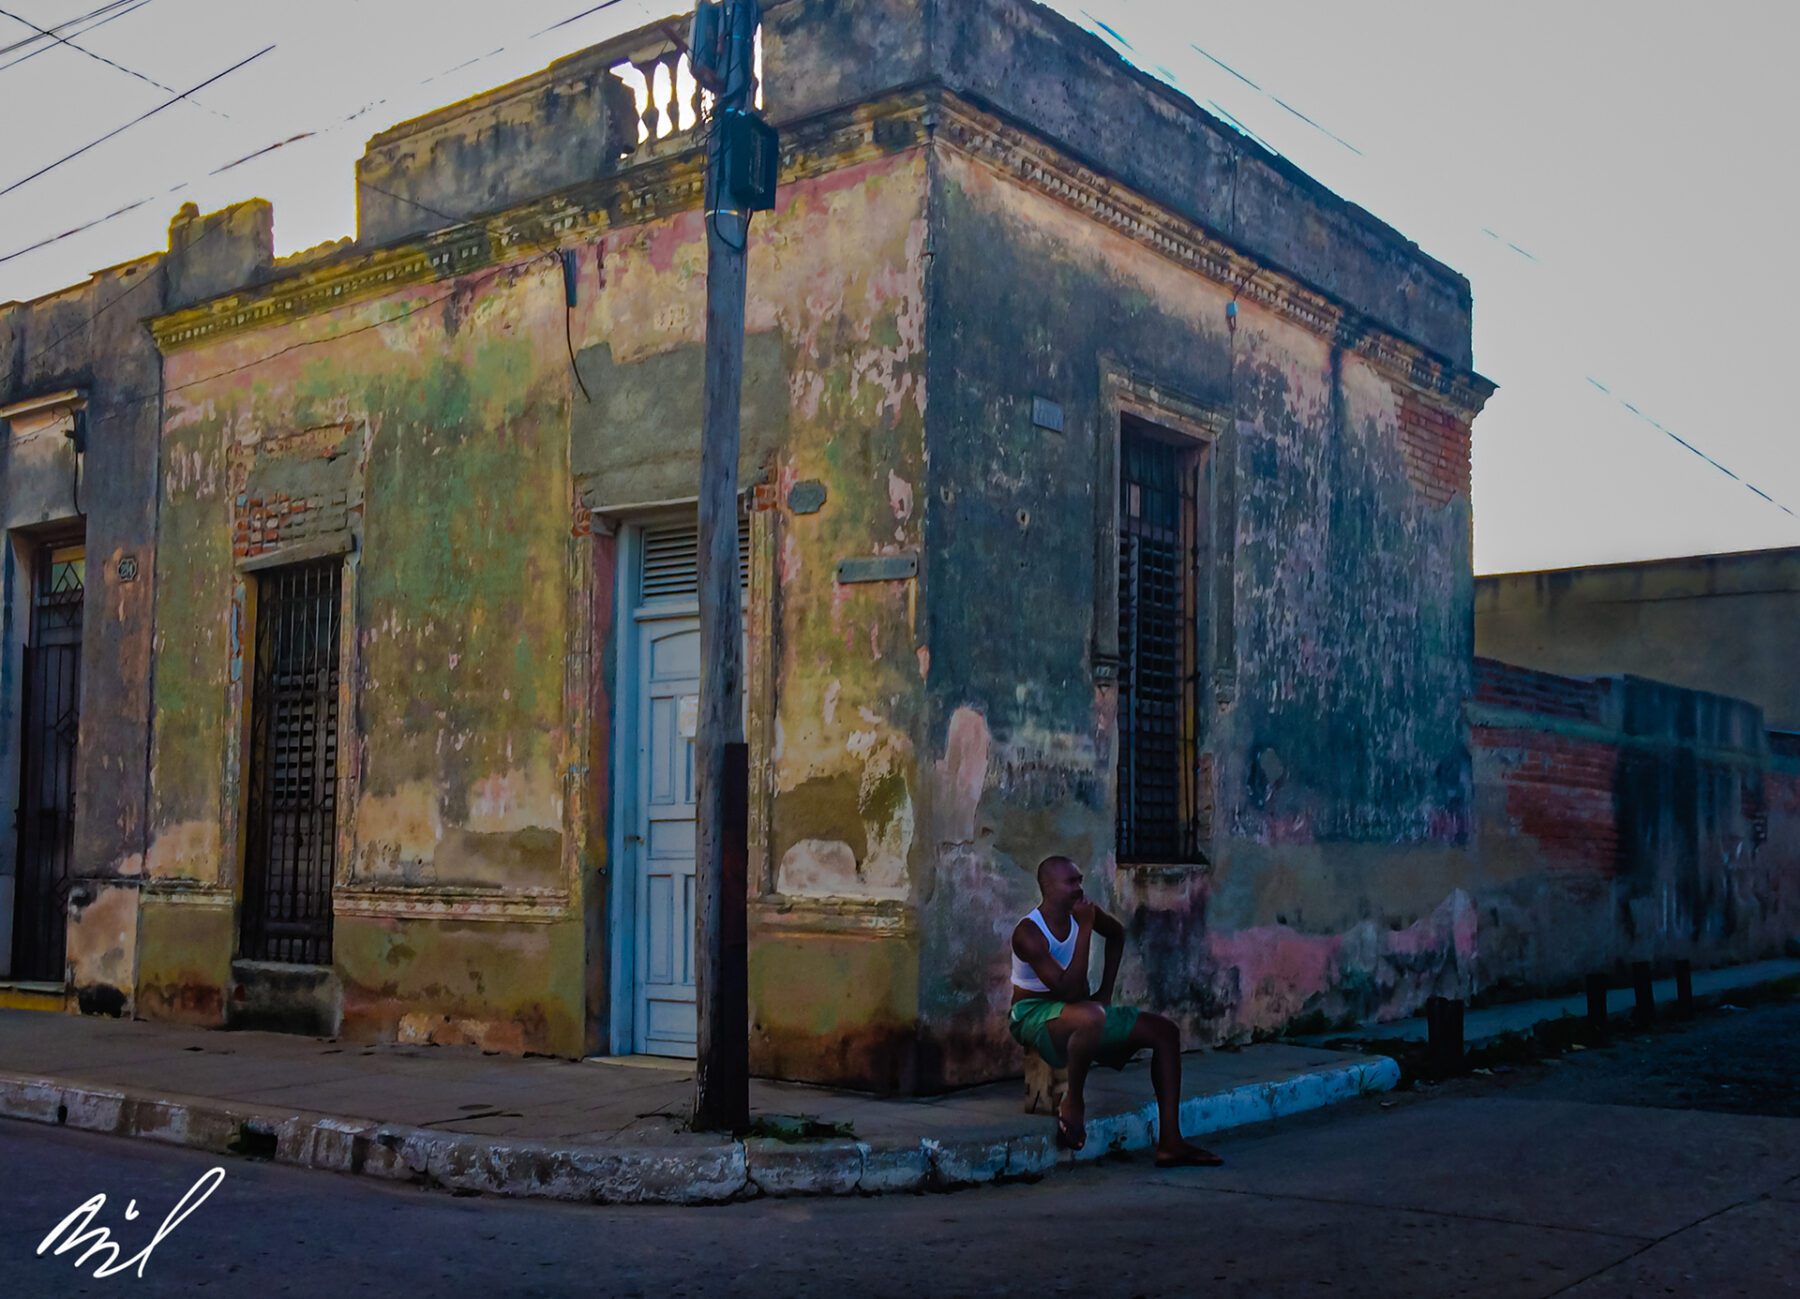 A man sitting on a bench in front of Cuba.